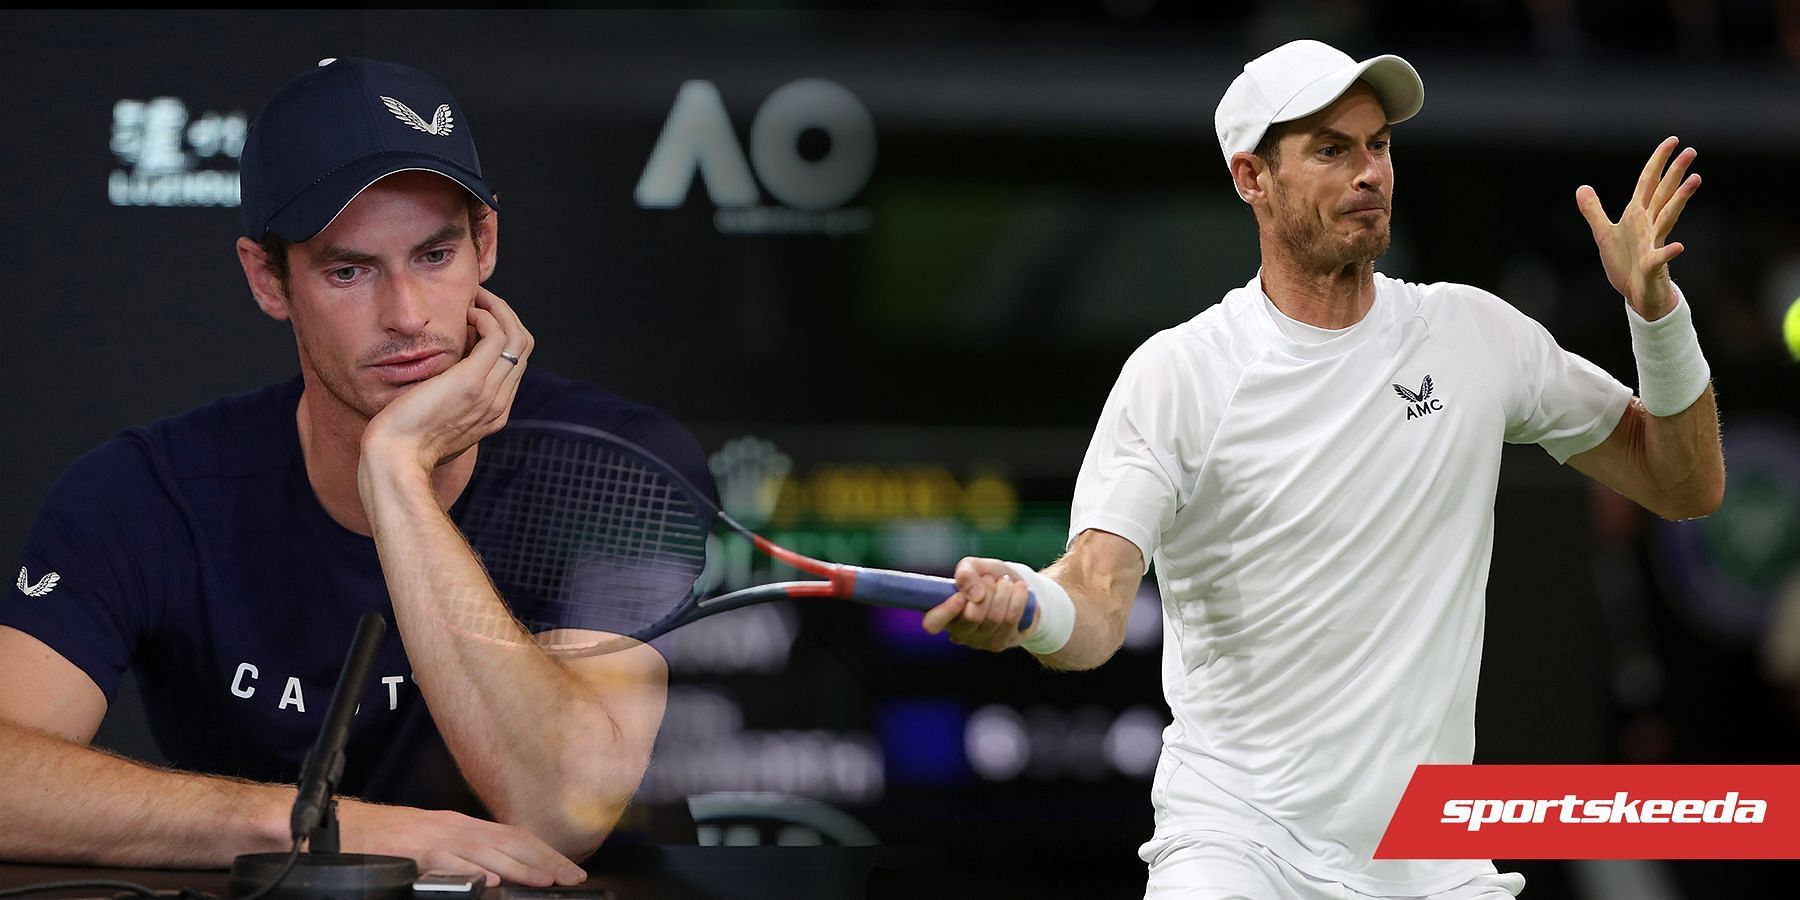 Andy Murray is into the second round at Wimbledon